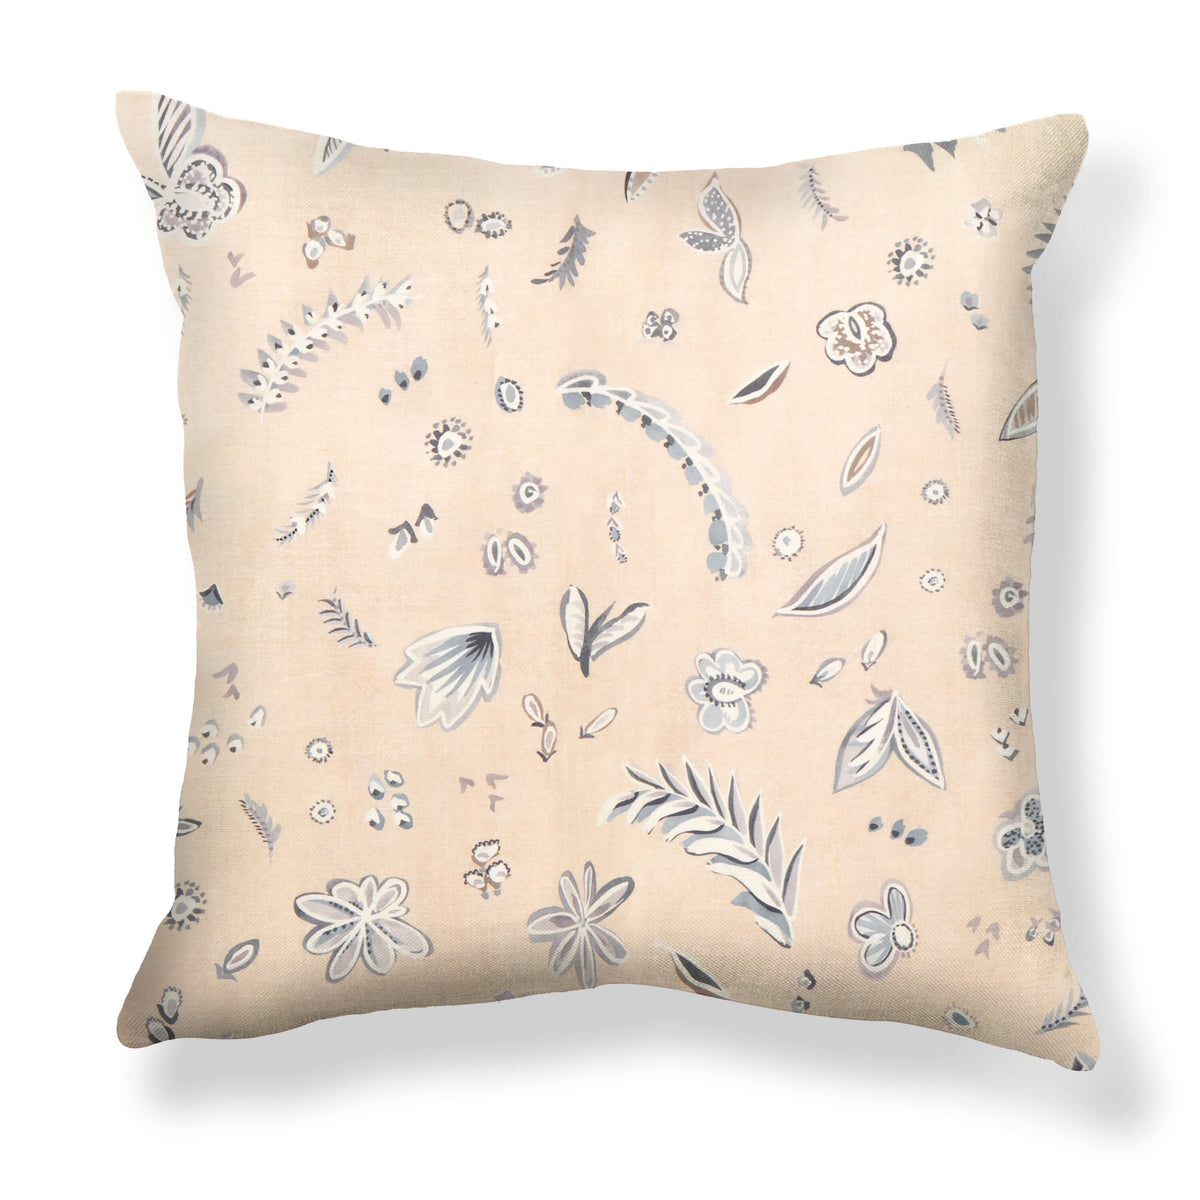 Flora Pillow in Taupe/Gray